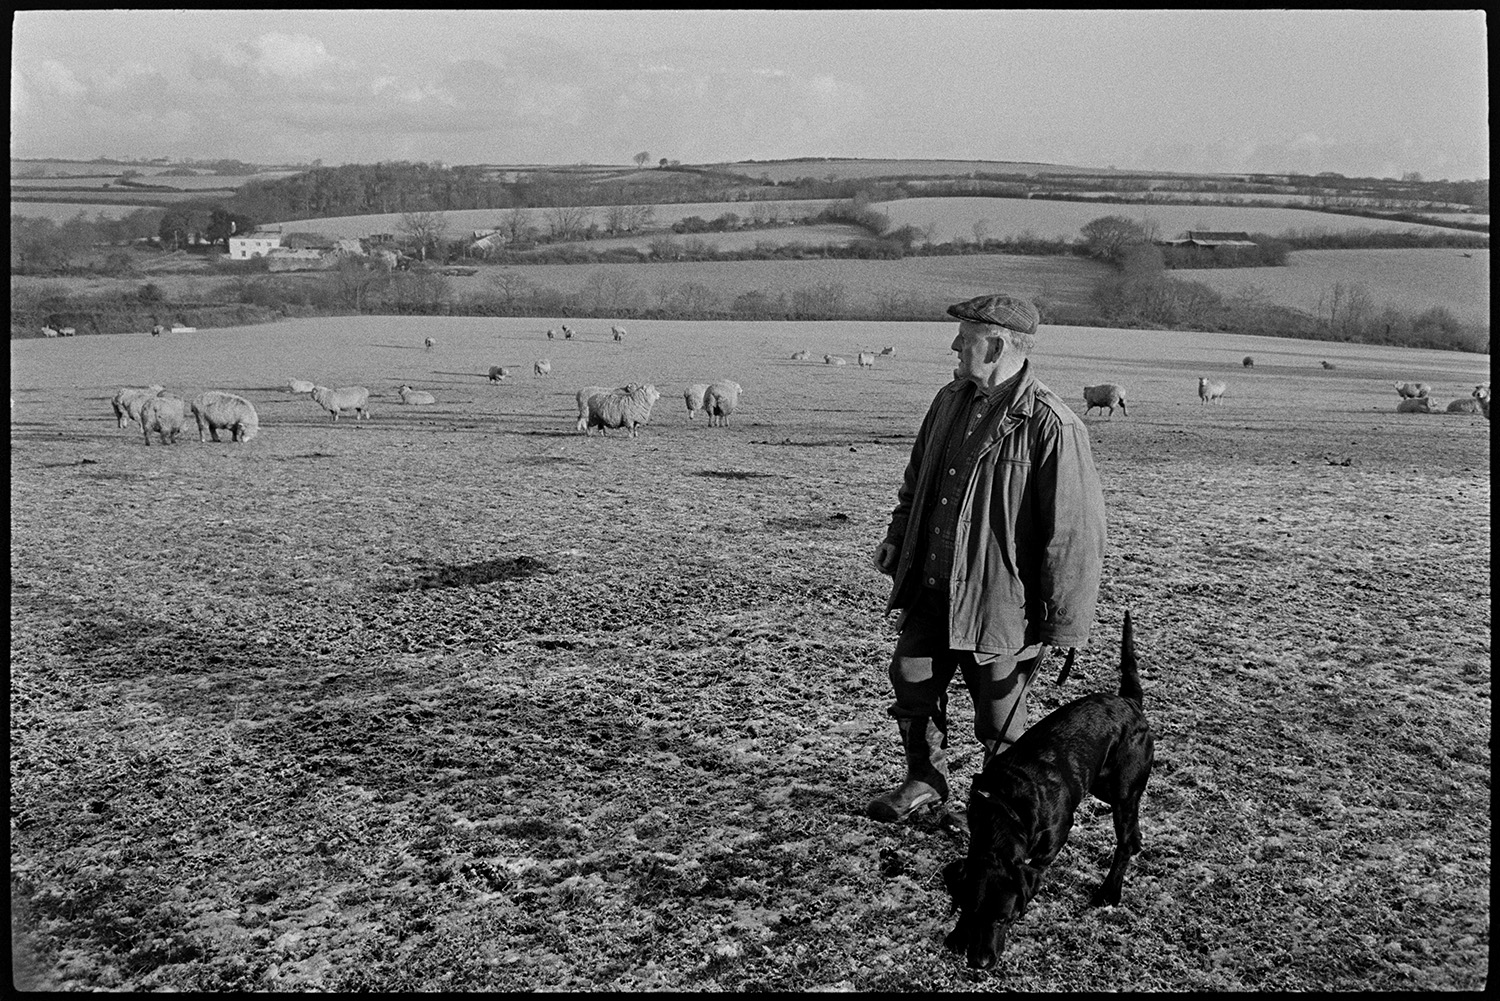 Farmer checking sheep in snow.
[Bob Friend, with a dog on a lead, checking sheep in a field at Cawseys, Roborough. The field has a light covering of snow, and a view of surrounding fields and hedges in the background.]